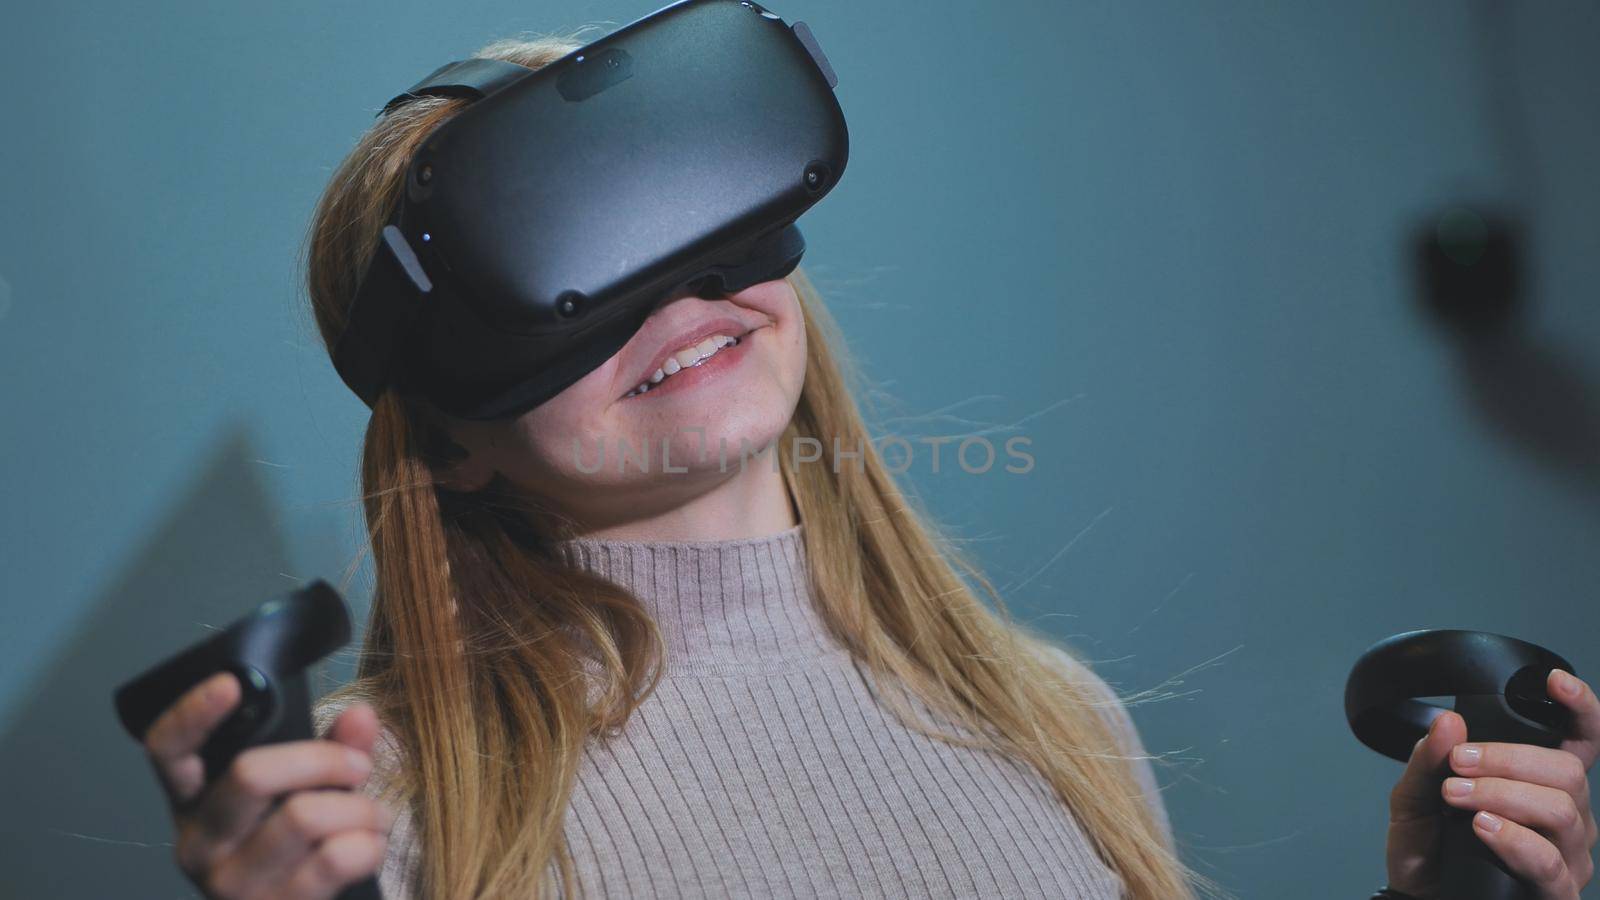 The girl plays virtual reality games in the club